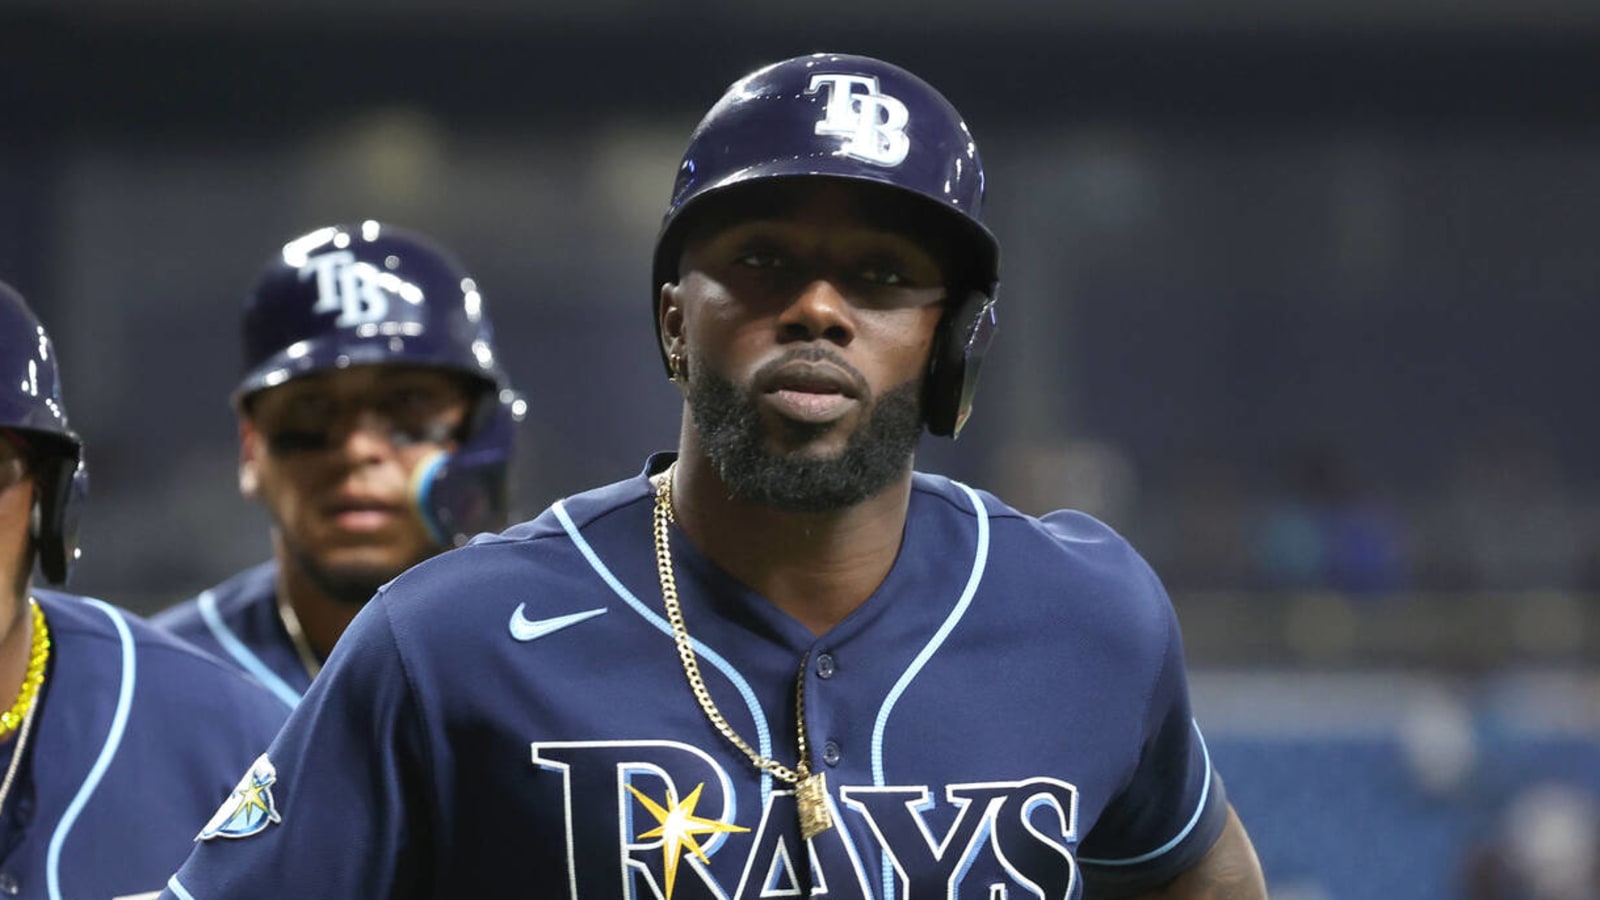 Rays keep making history, setting records with incredible start